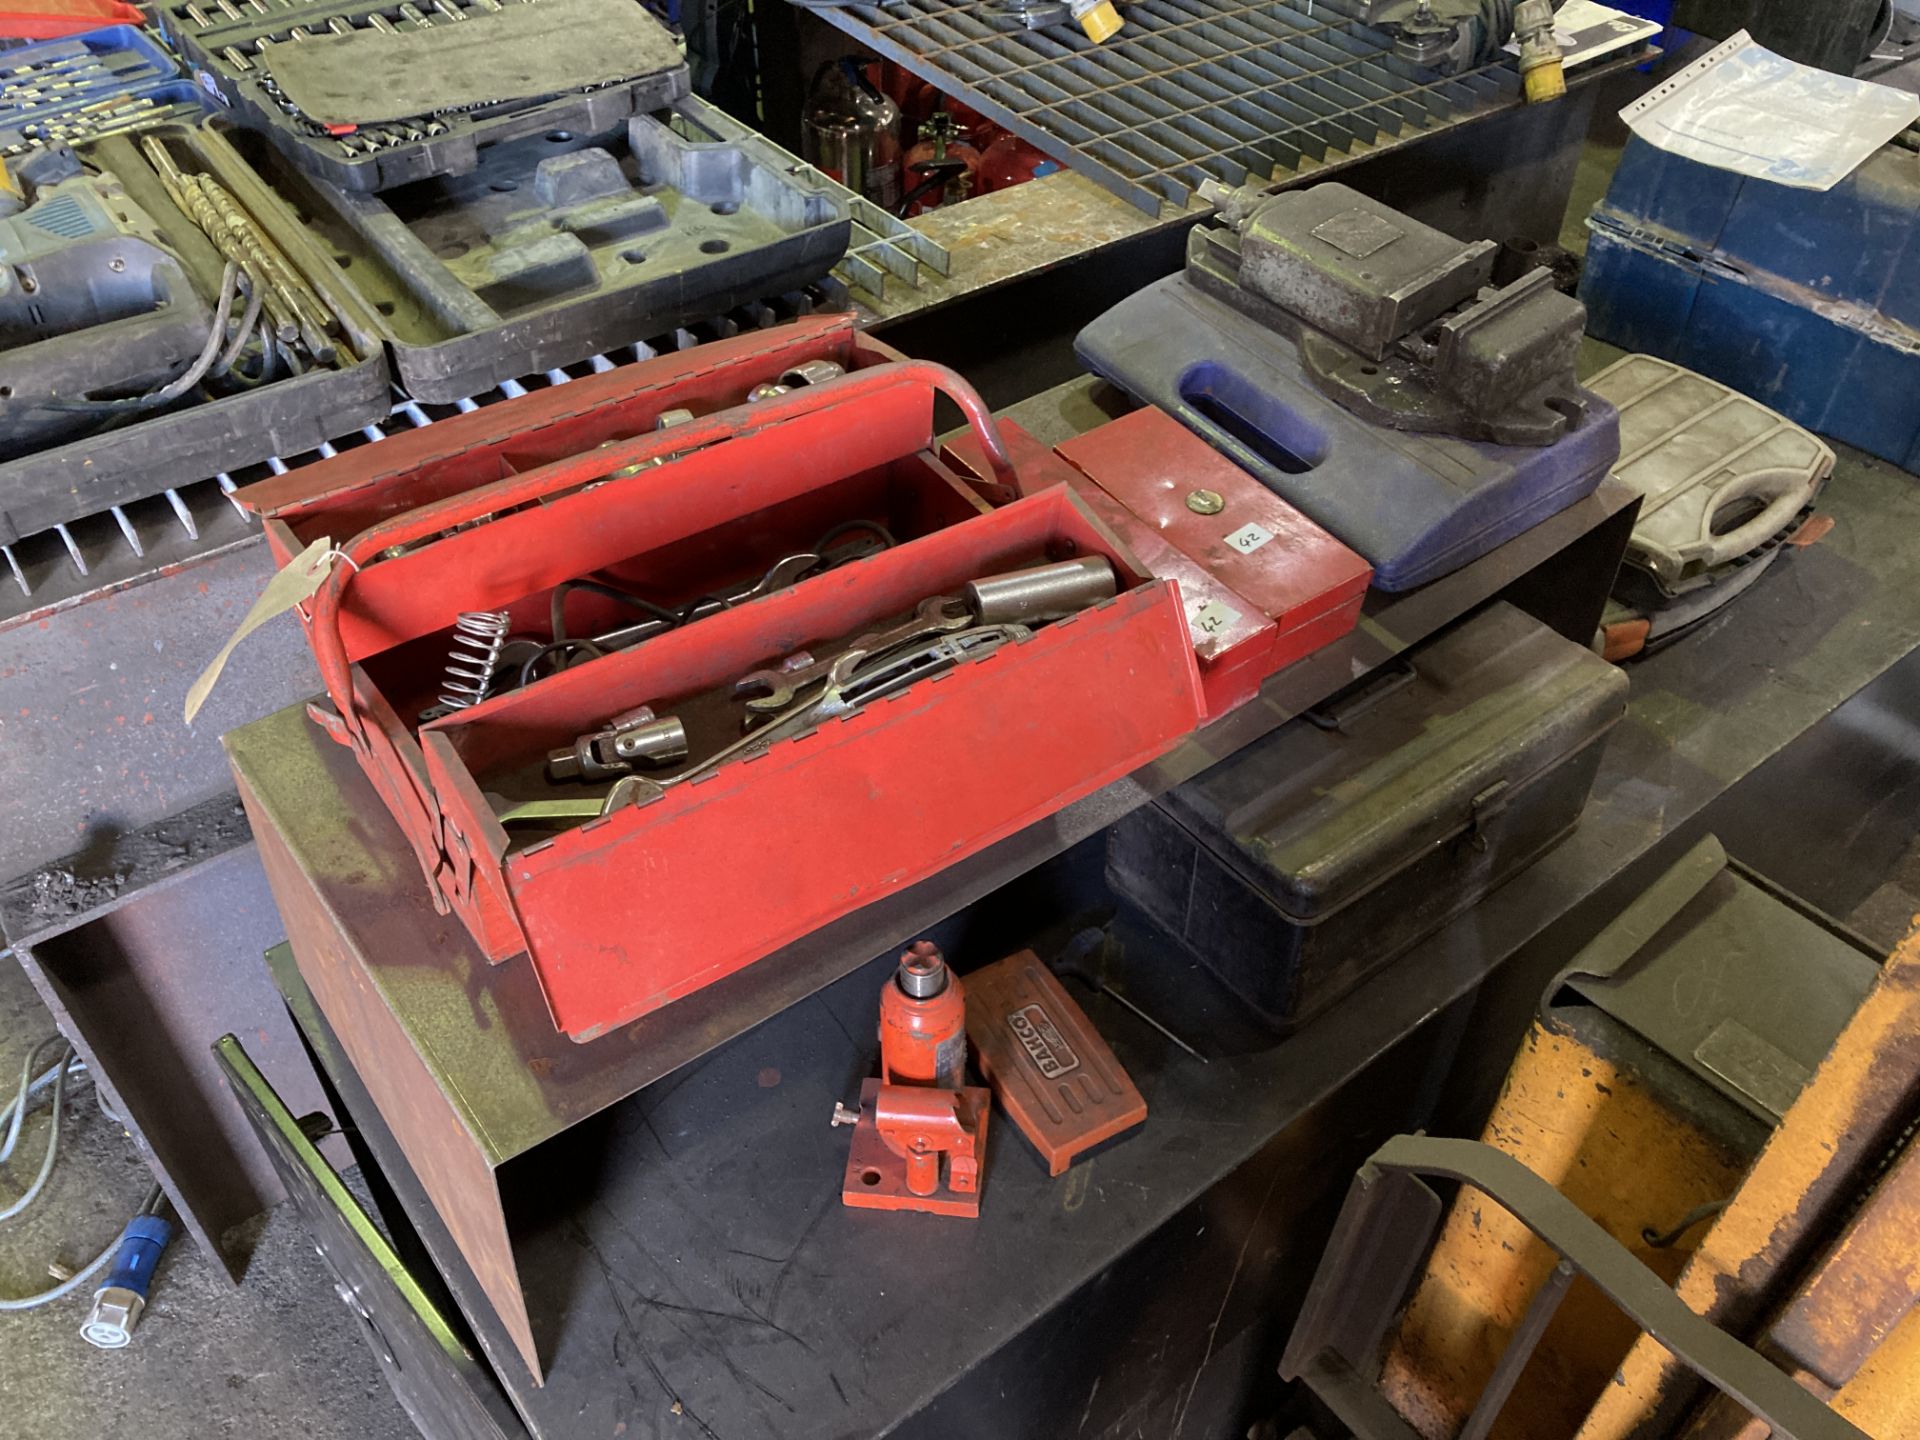 Range of miscellaneous toolboxes, spanners, jig, sockets, machine vice, etc (everything on top of